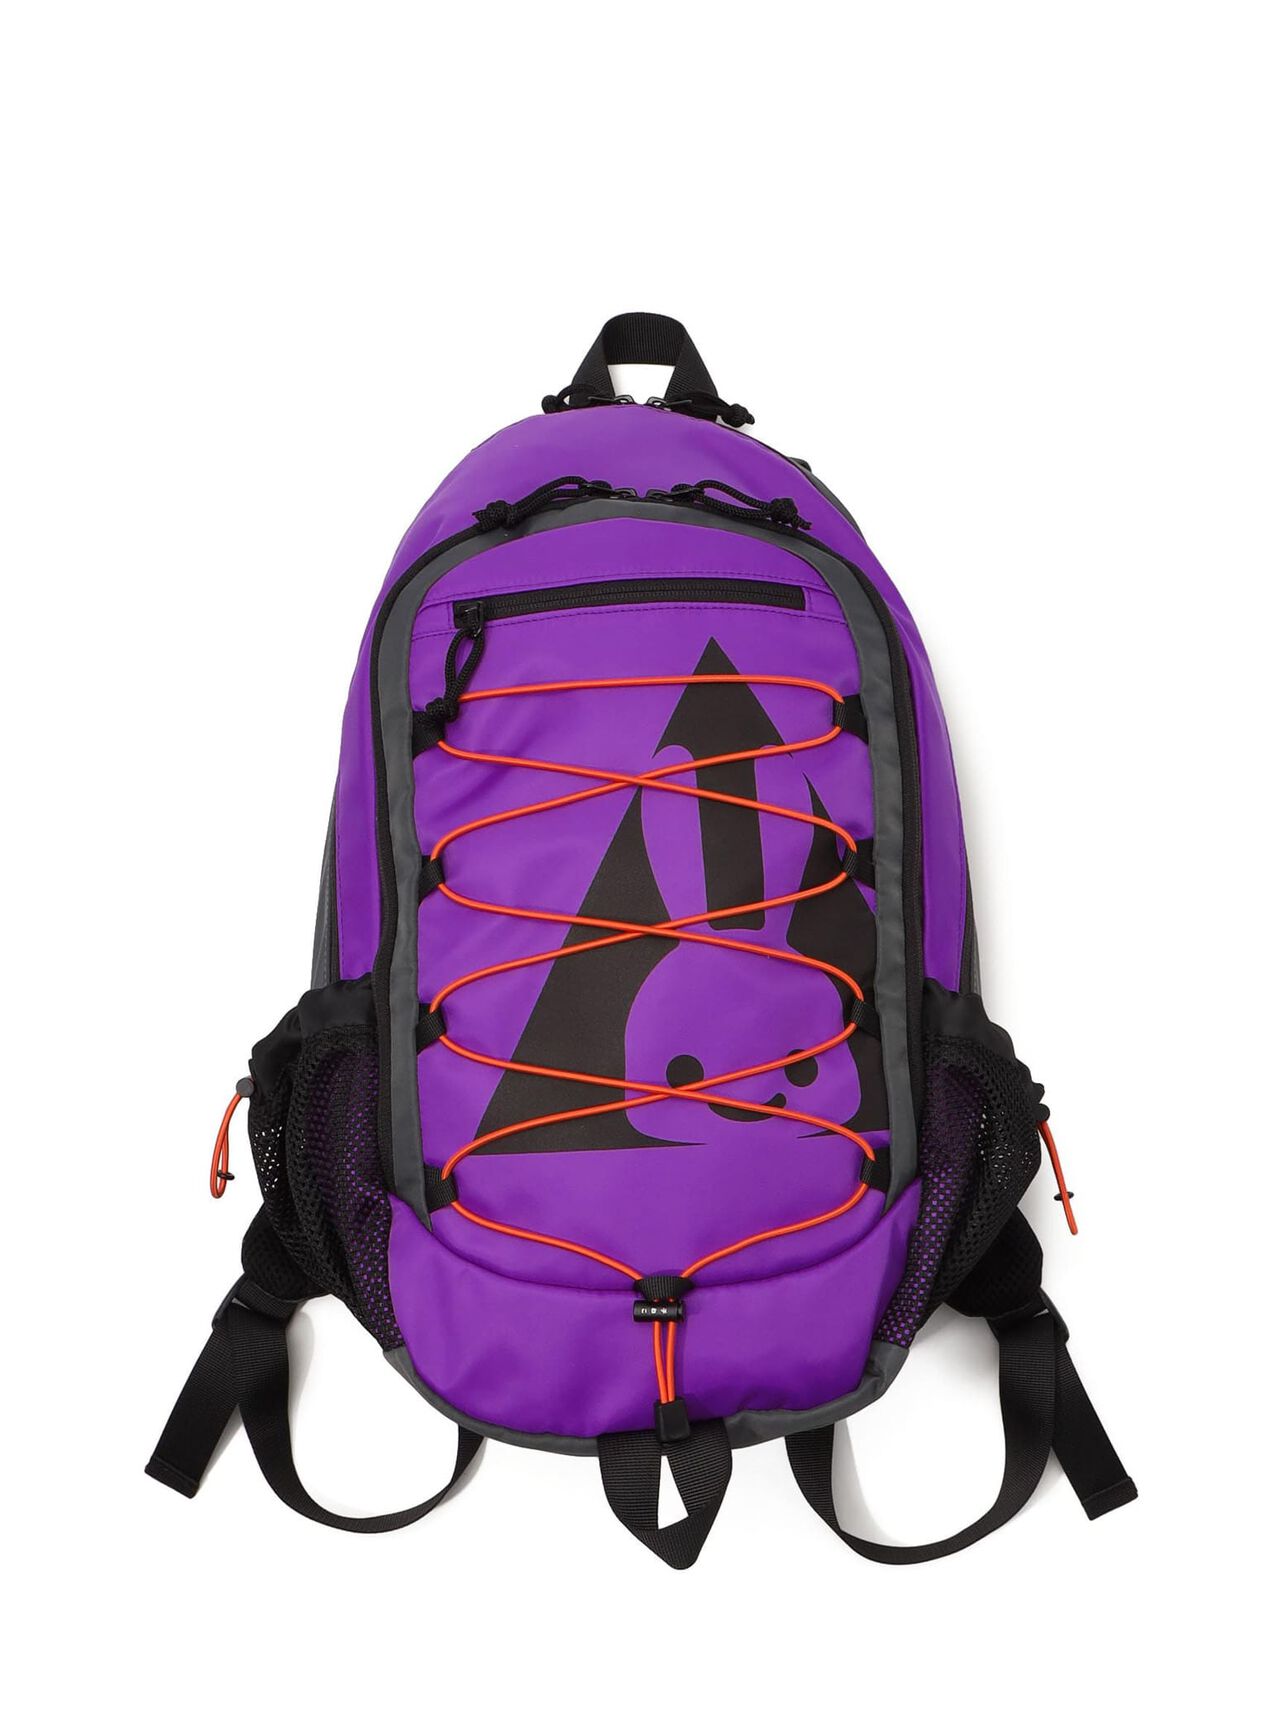 ODC2 Backpack,ONE, large image number 0